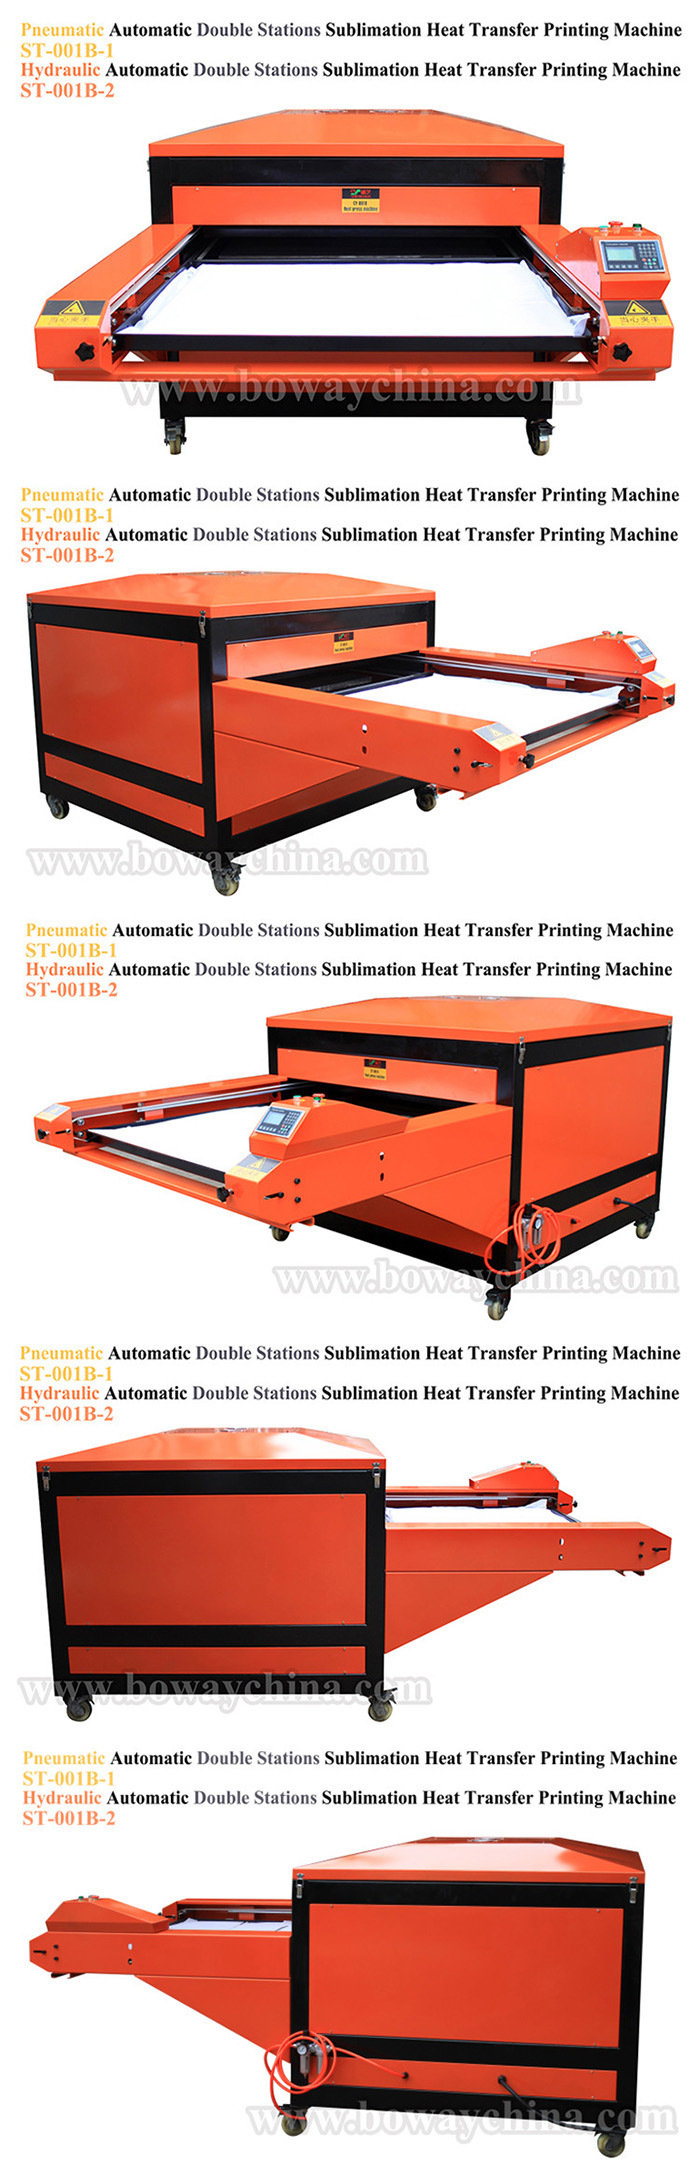 Large Format Hydraulic Automatic Double Stations Flatbed Hot Heat Transfer Press Tshirt Printer